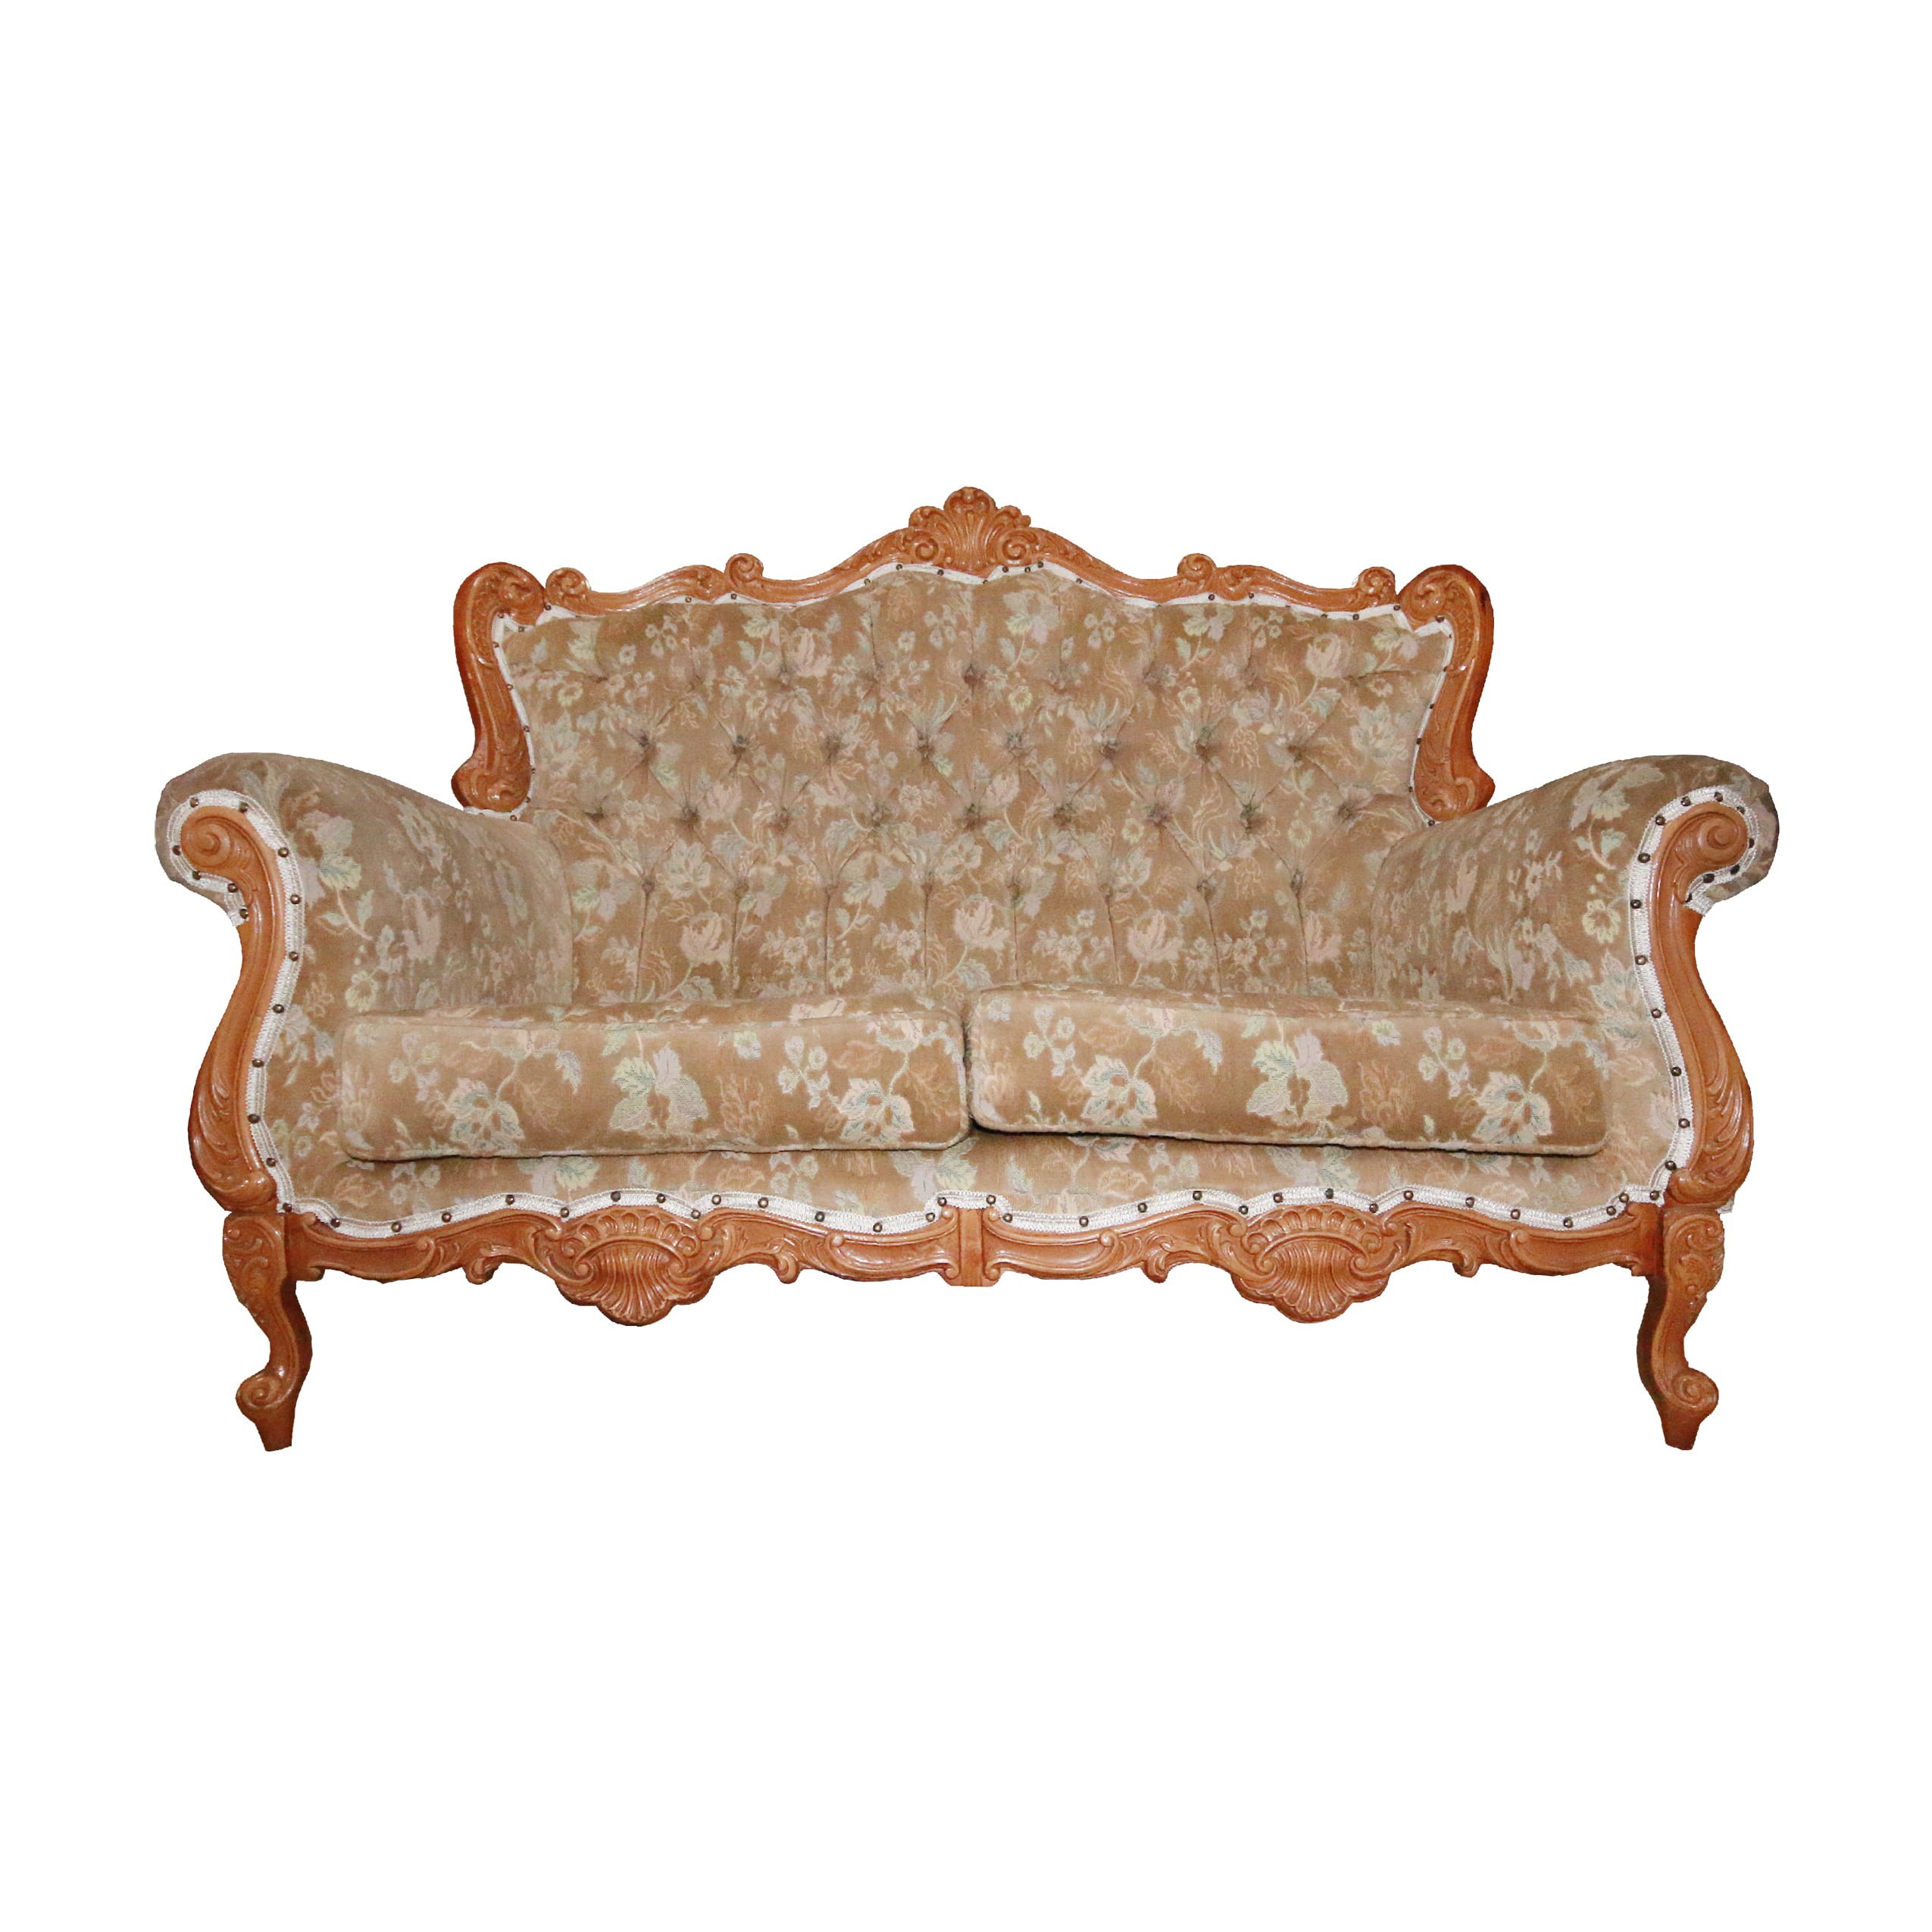 Carved 2 seater sofa